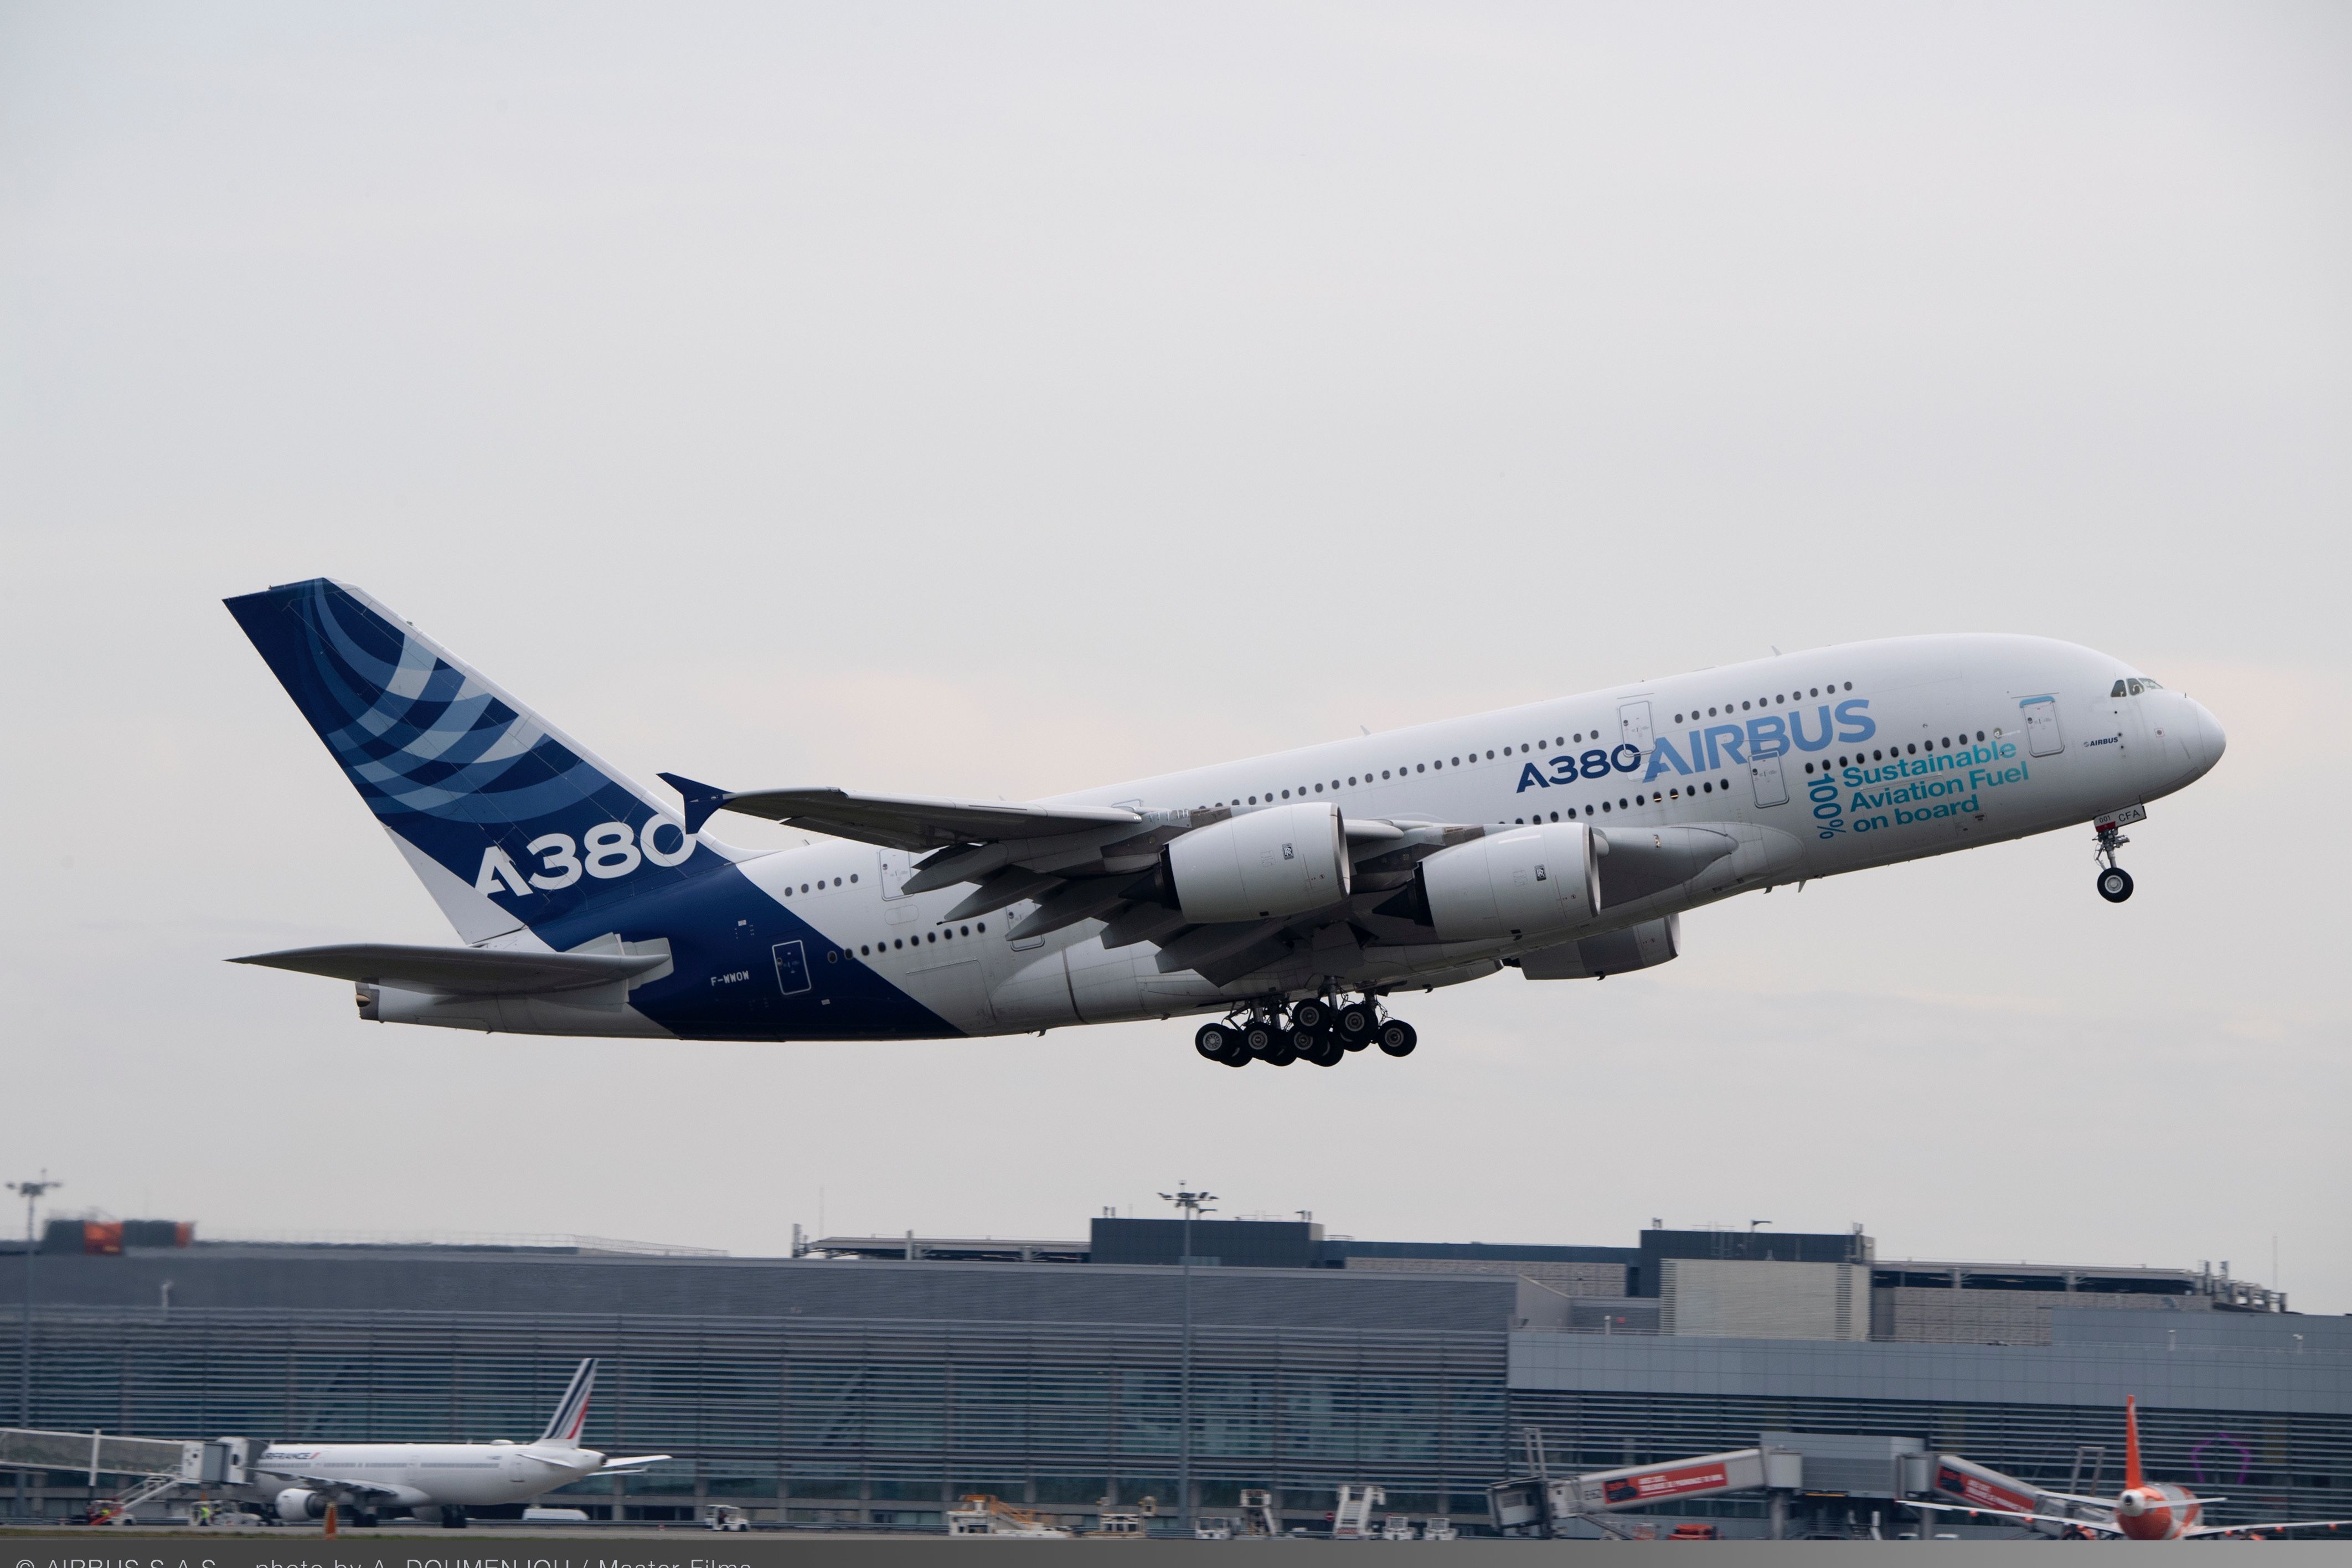 An Airbus A380 in house livery taking off.